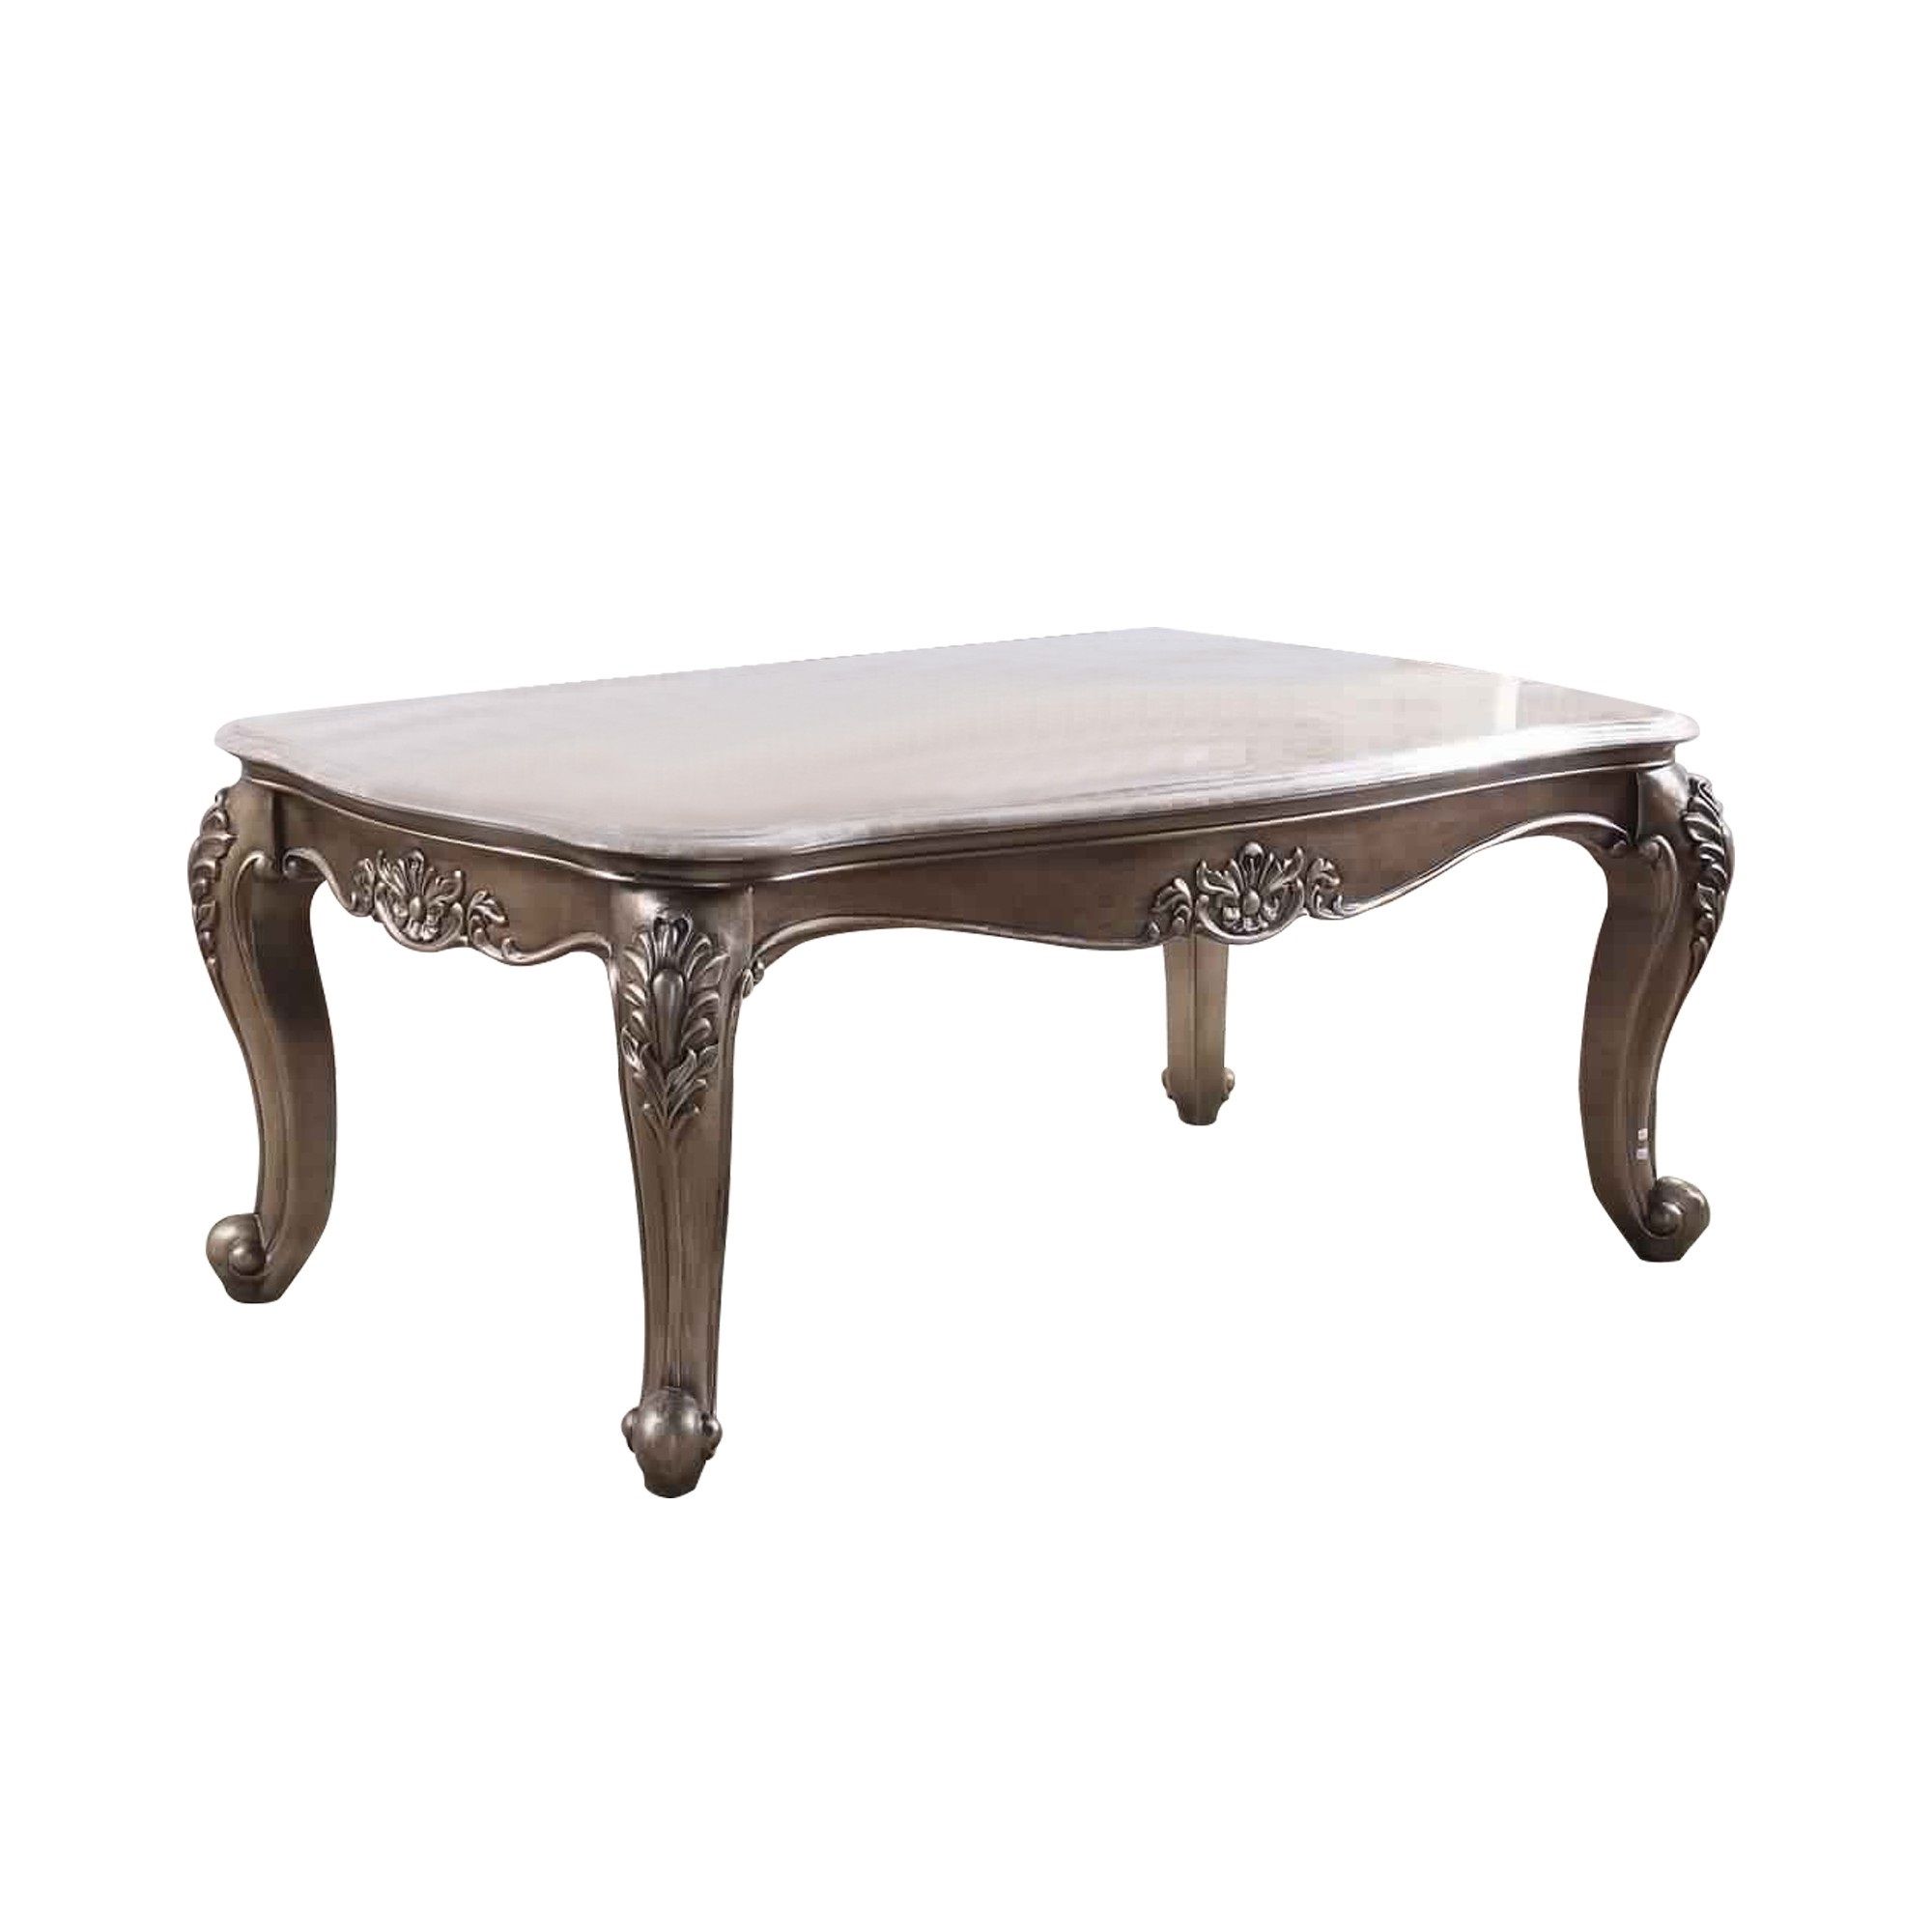 Trendy Faux White Marble And Metal Coffee Tables With Faux Marble Top Engraved Wooden Frame Coffee Table, Off (Gallery 6 of 20)